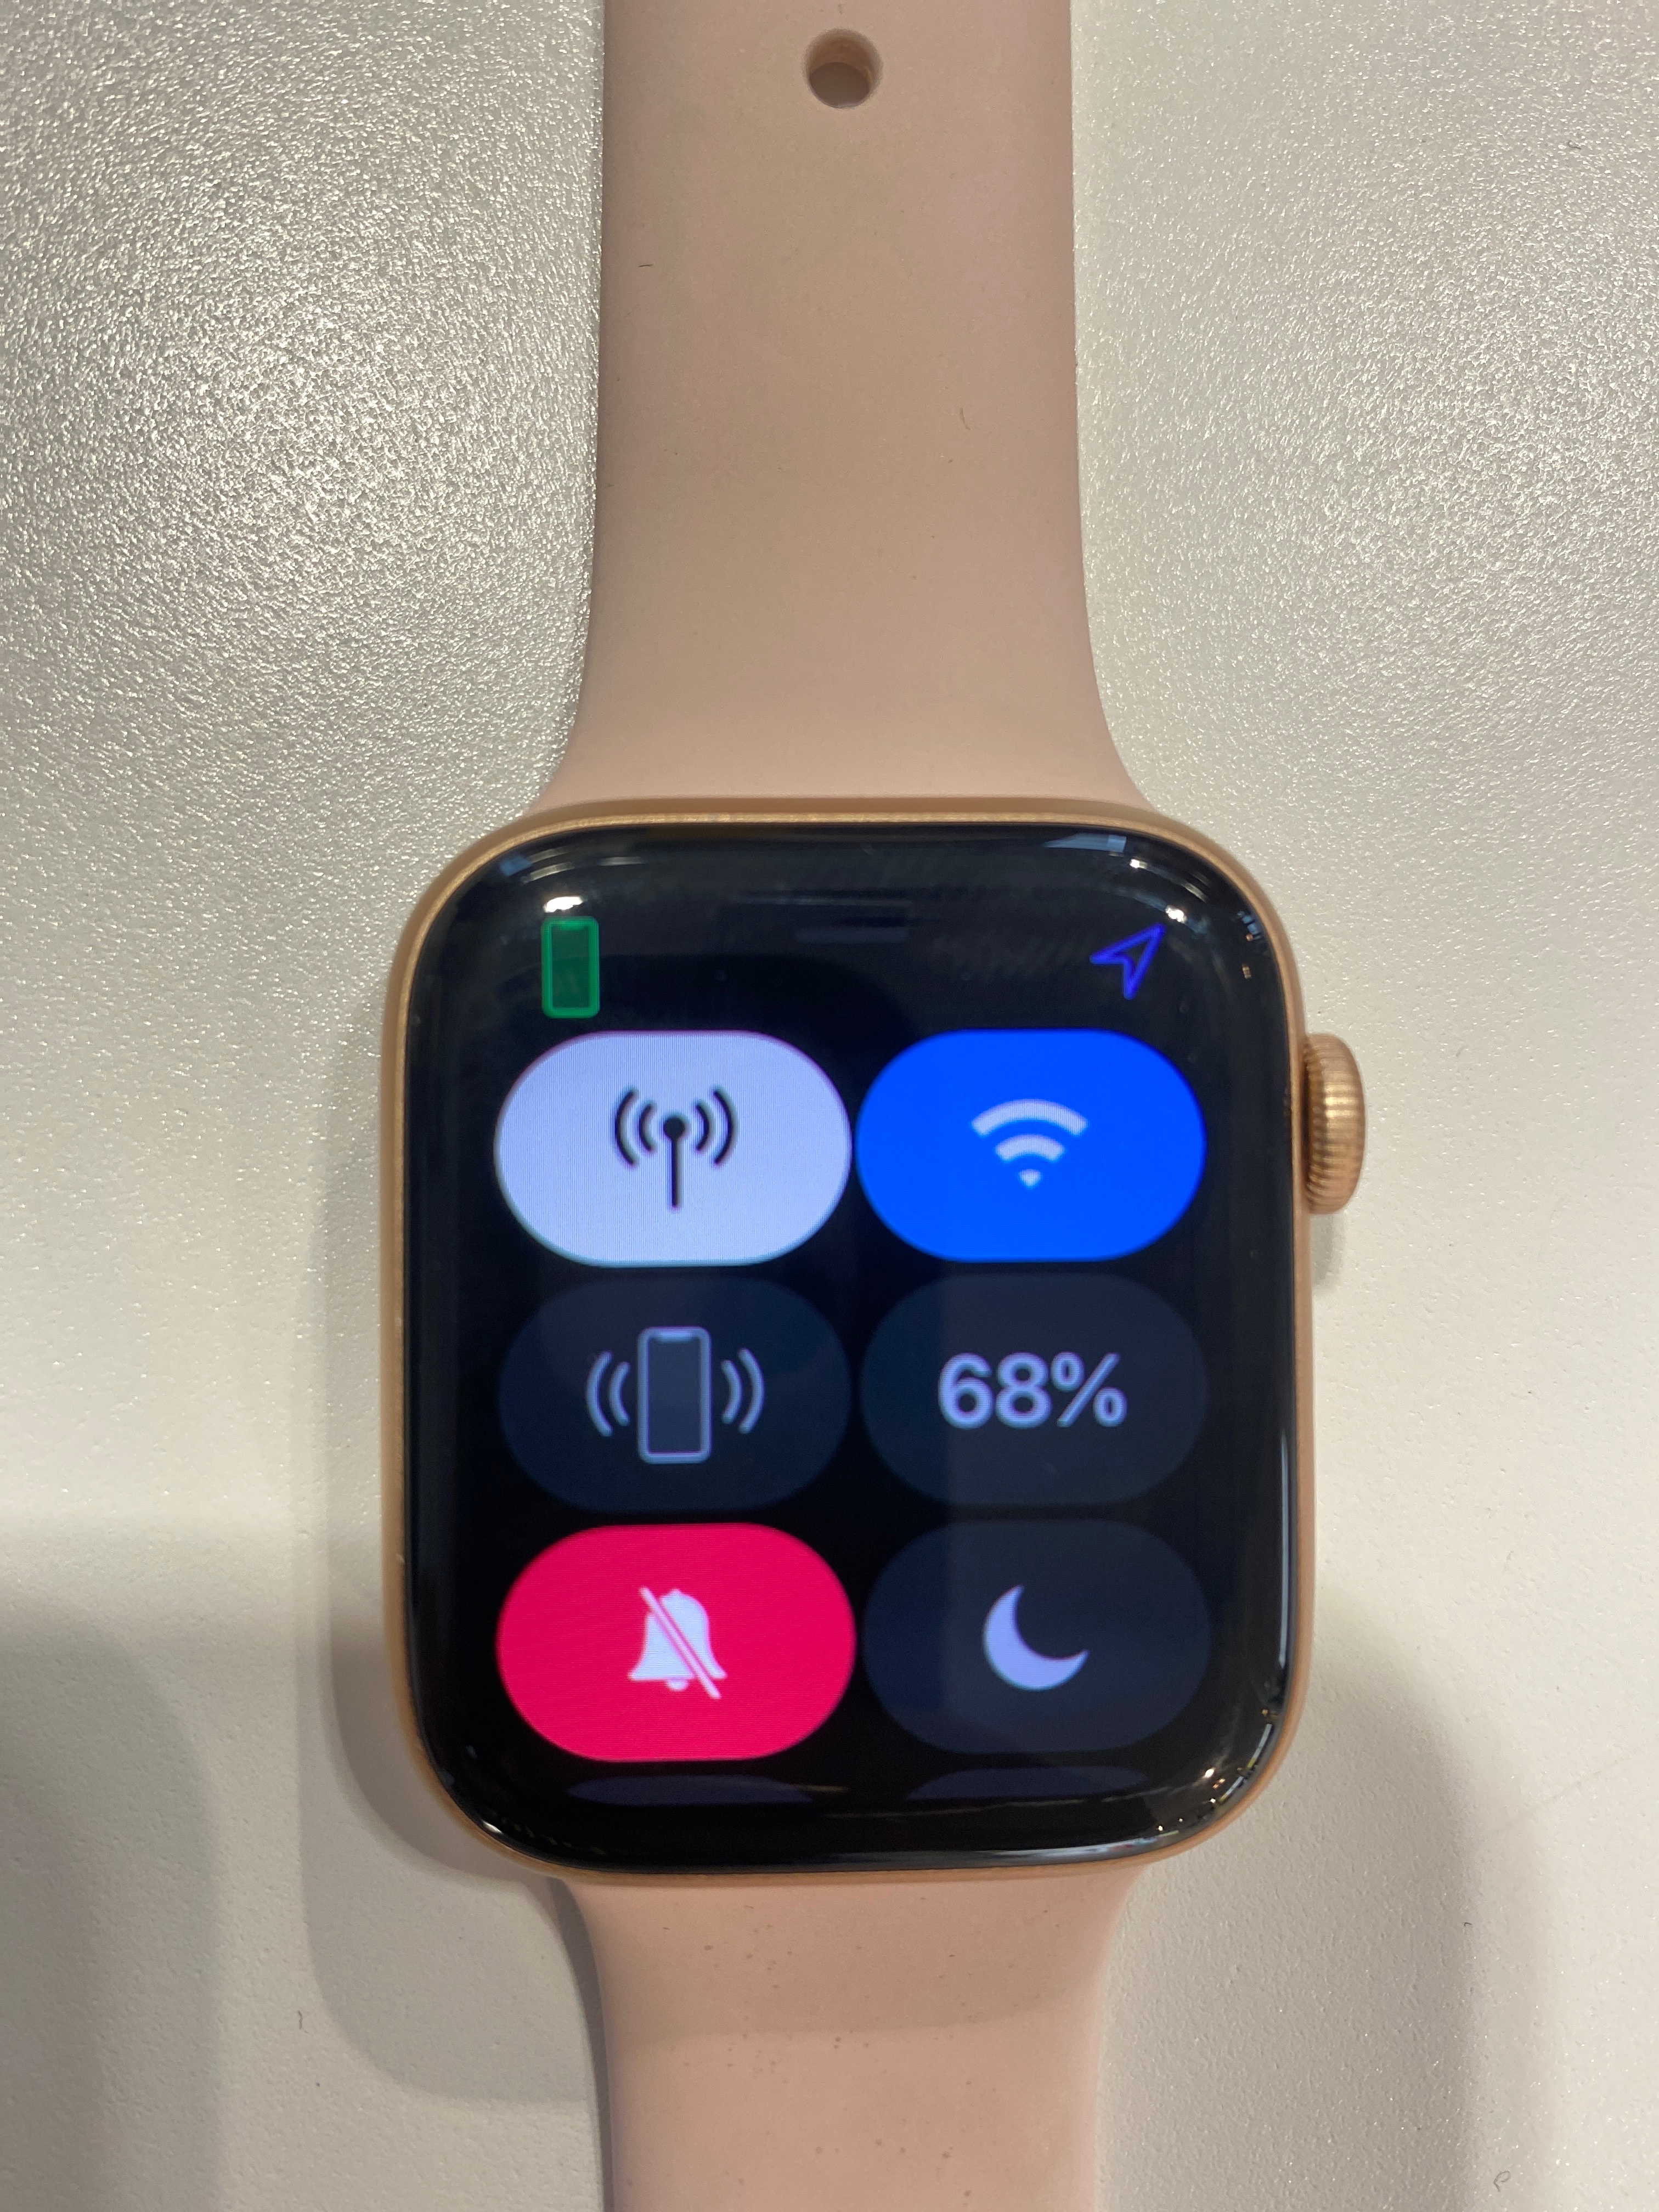 Cellular not working on watch Apple Community